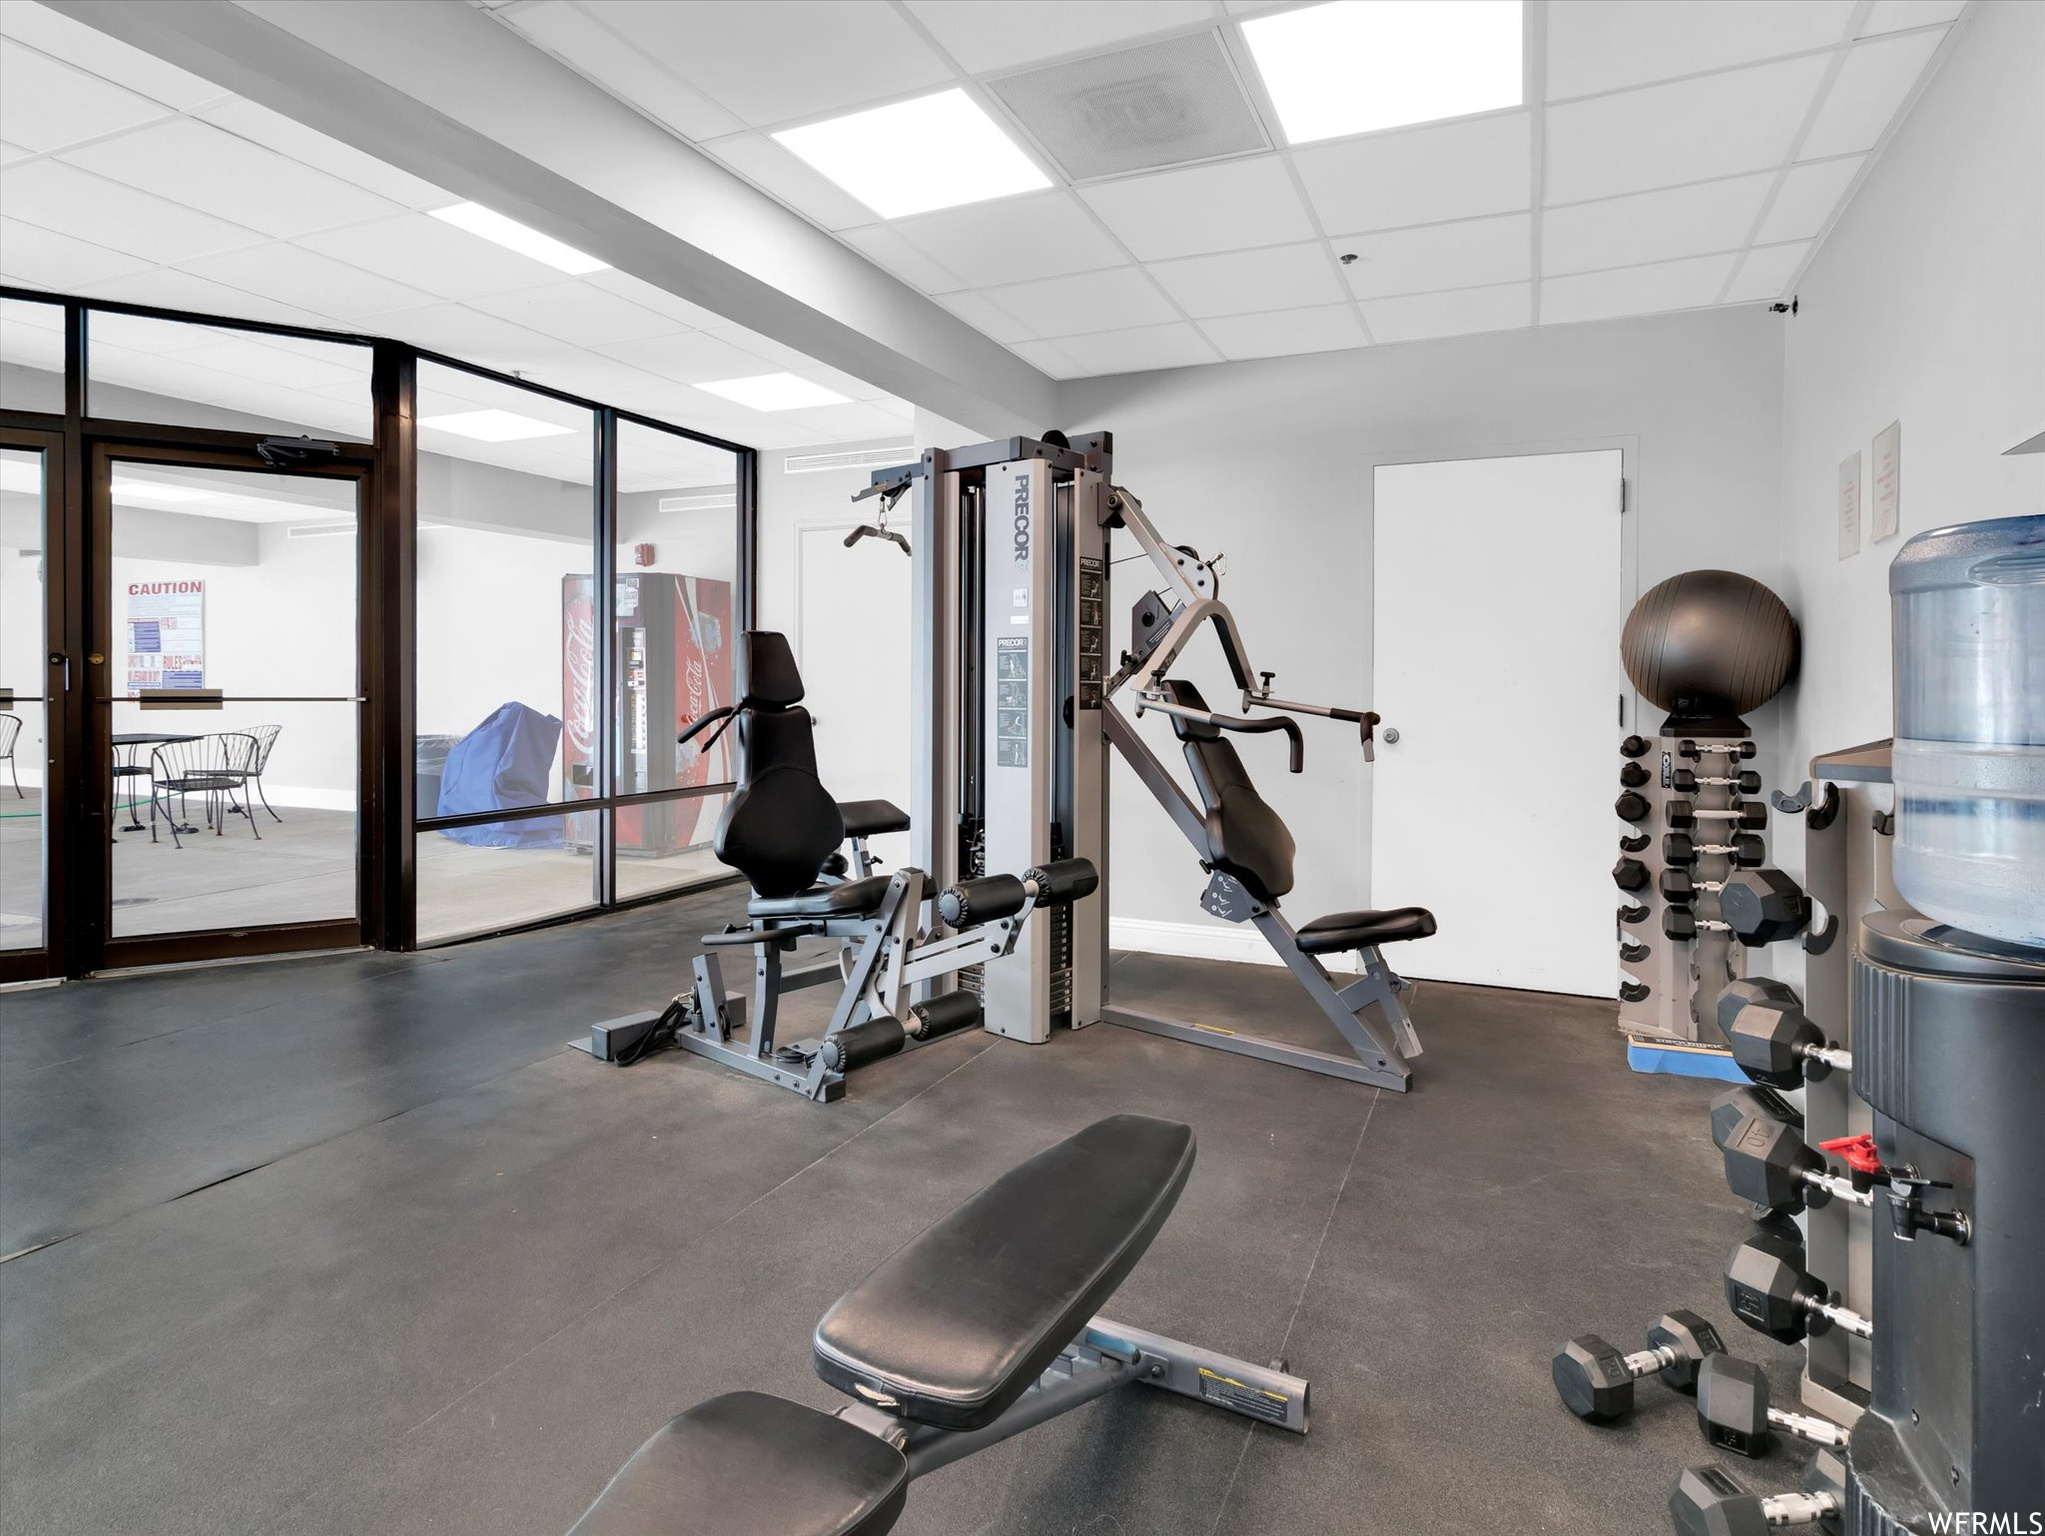 Exercise room with expansive windows and a paneled ceiling